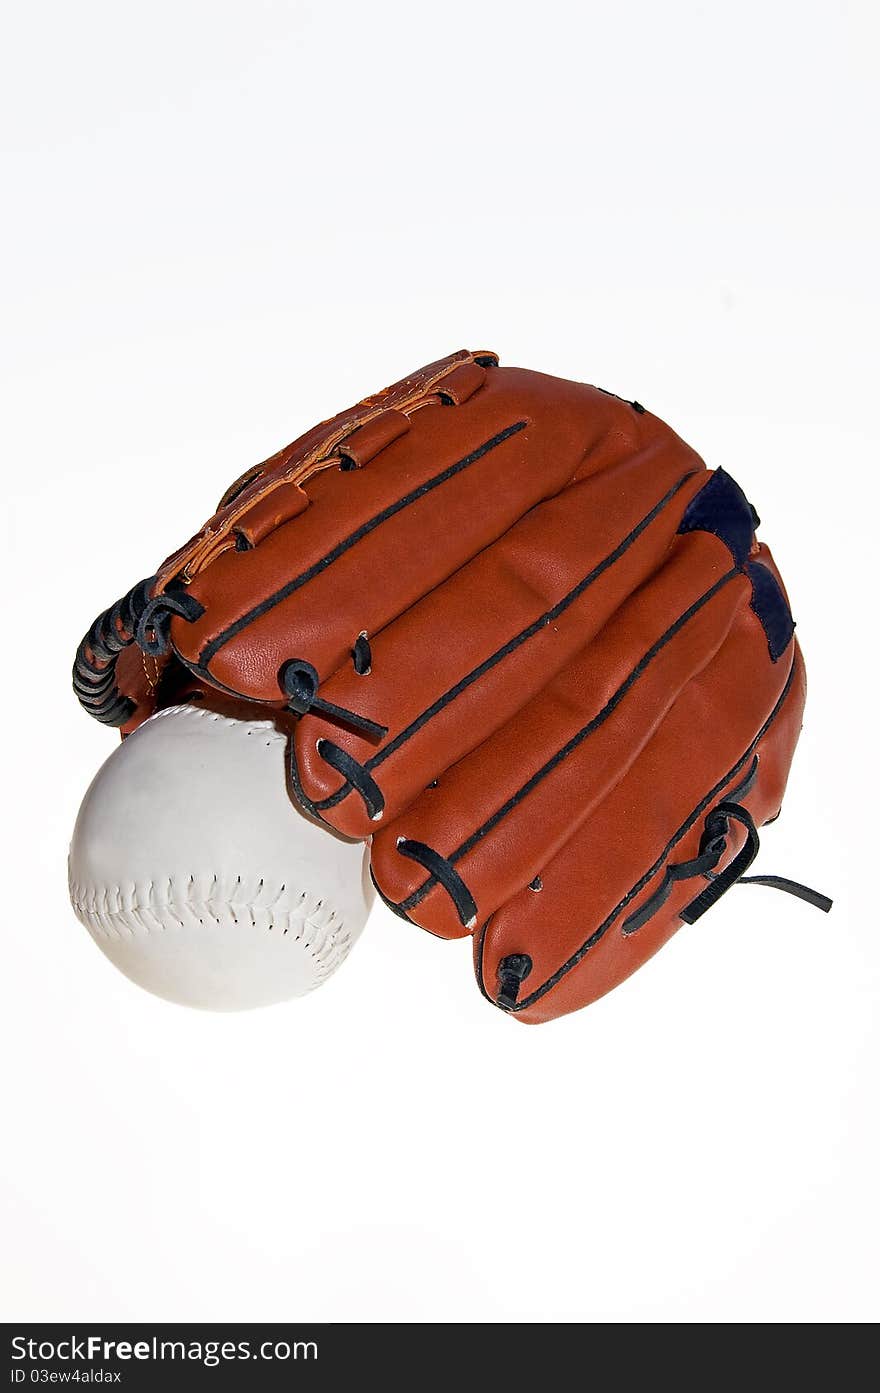 Baseball glove with the ball on the white background. Baseball glove with the ball on the white background